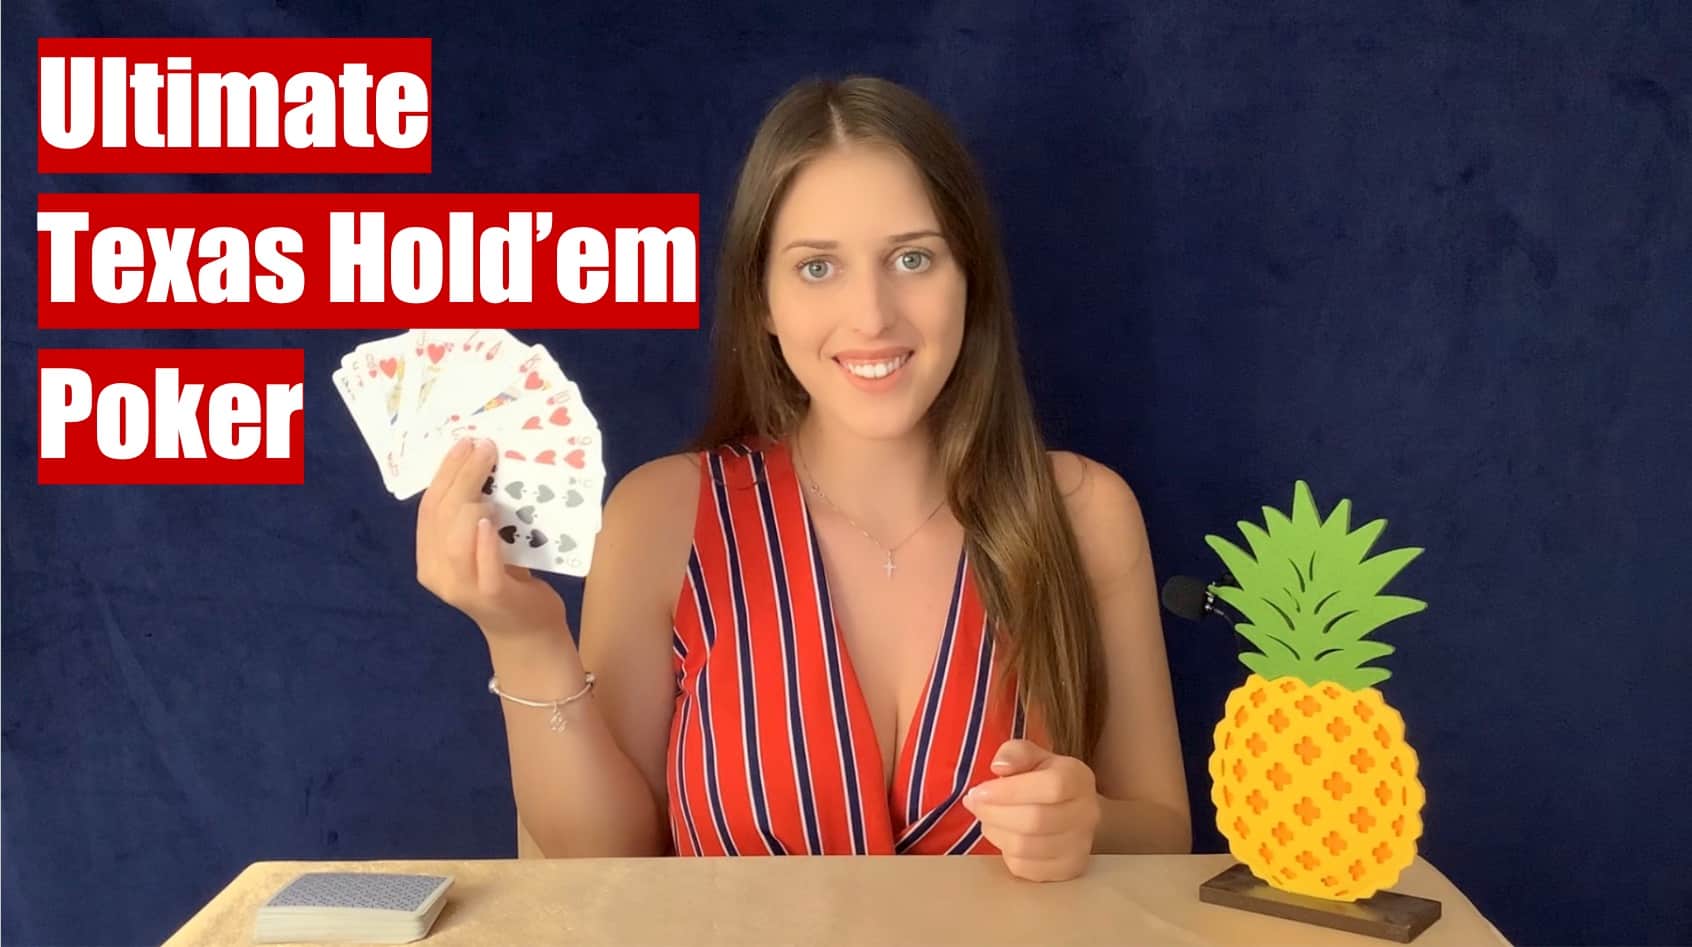 How to play Ultimate Texas Holdem Poker